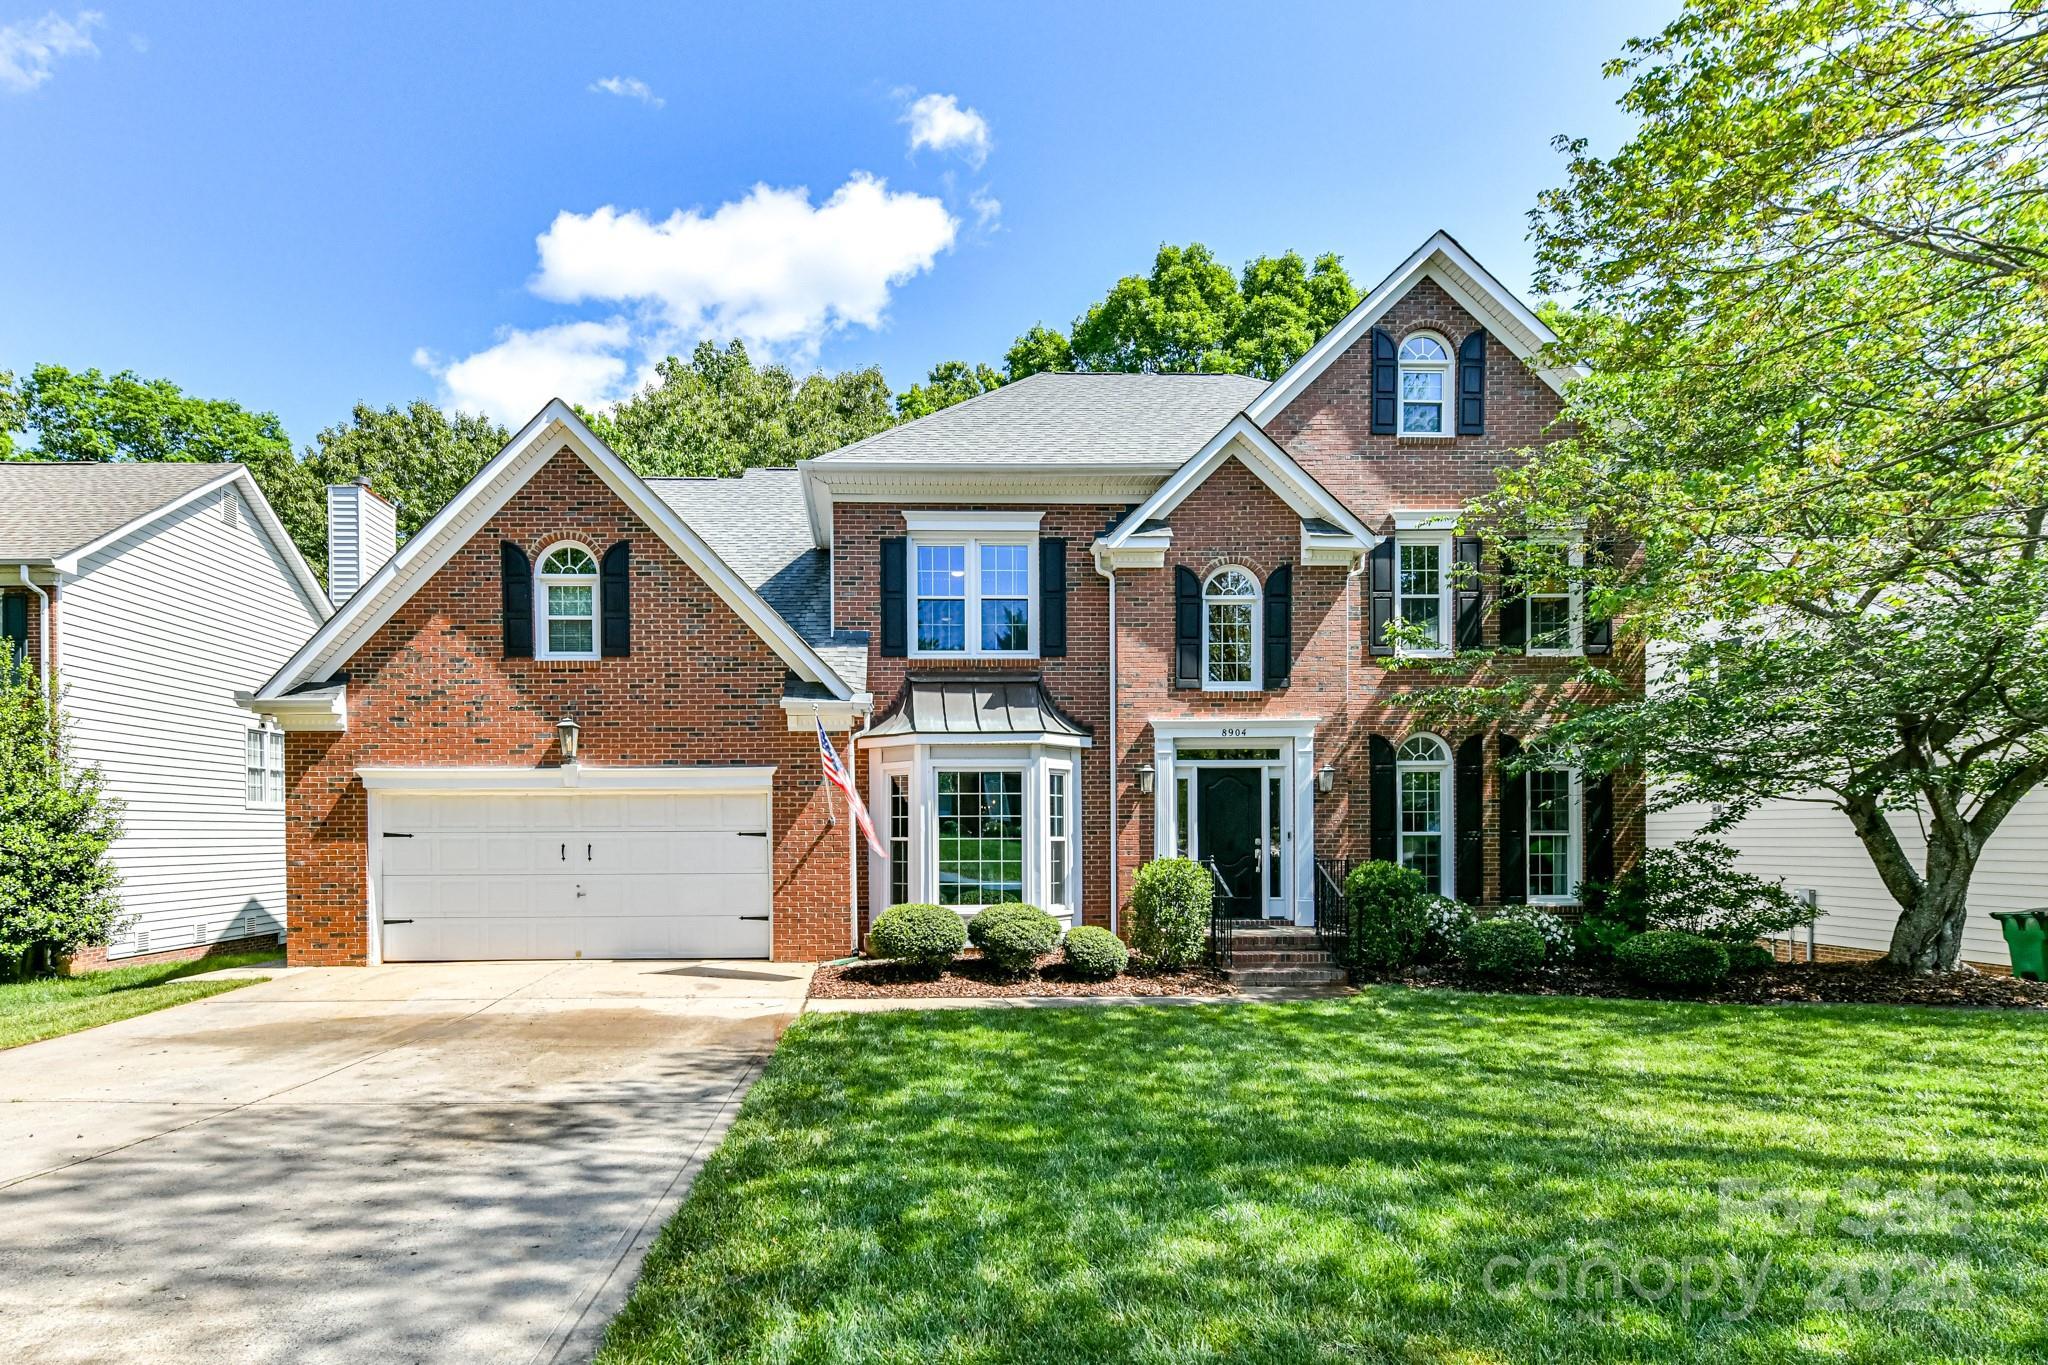 Photo one of 8904 Leinster Dr Charlotte NC 28277 | MLS 4126772